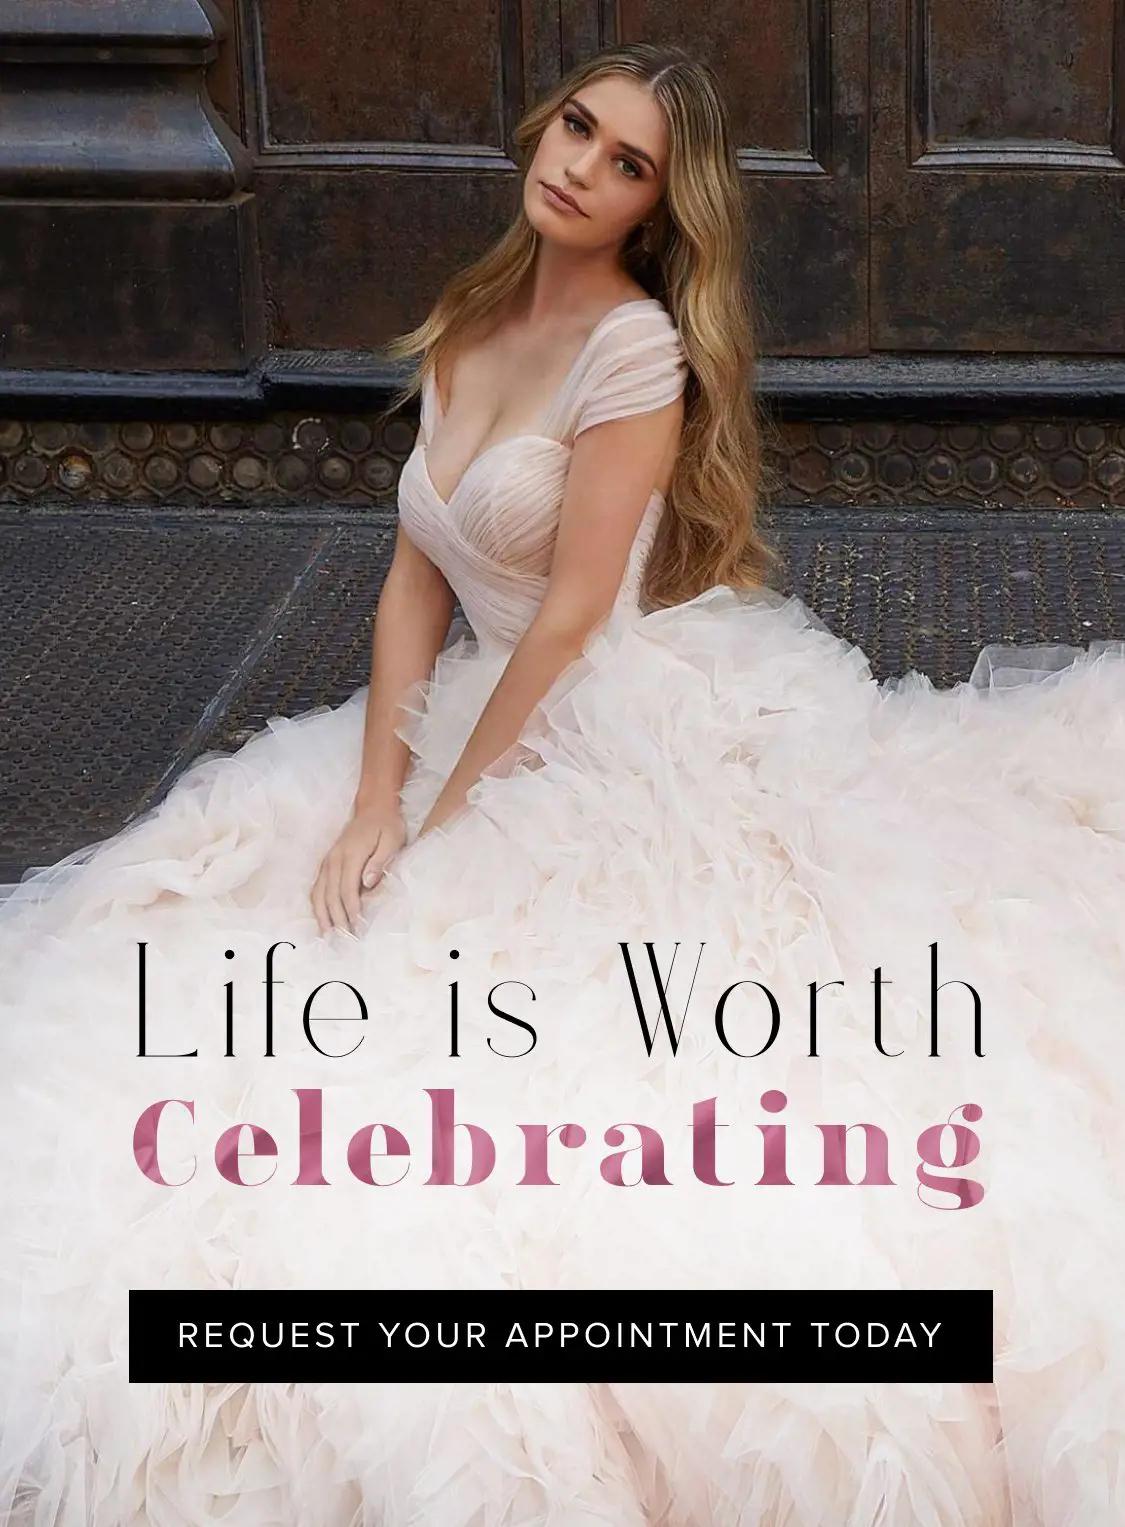 "Life is worth celebrating" banner for mobile